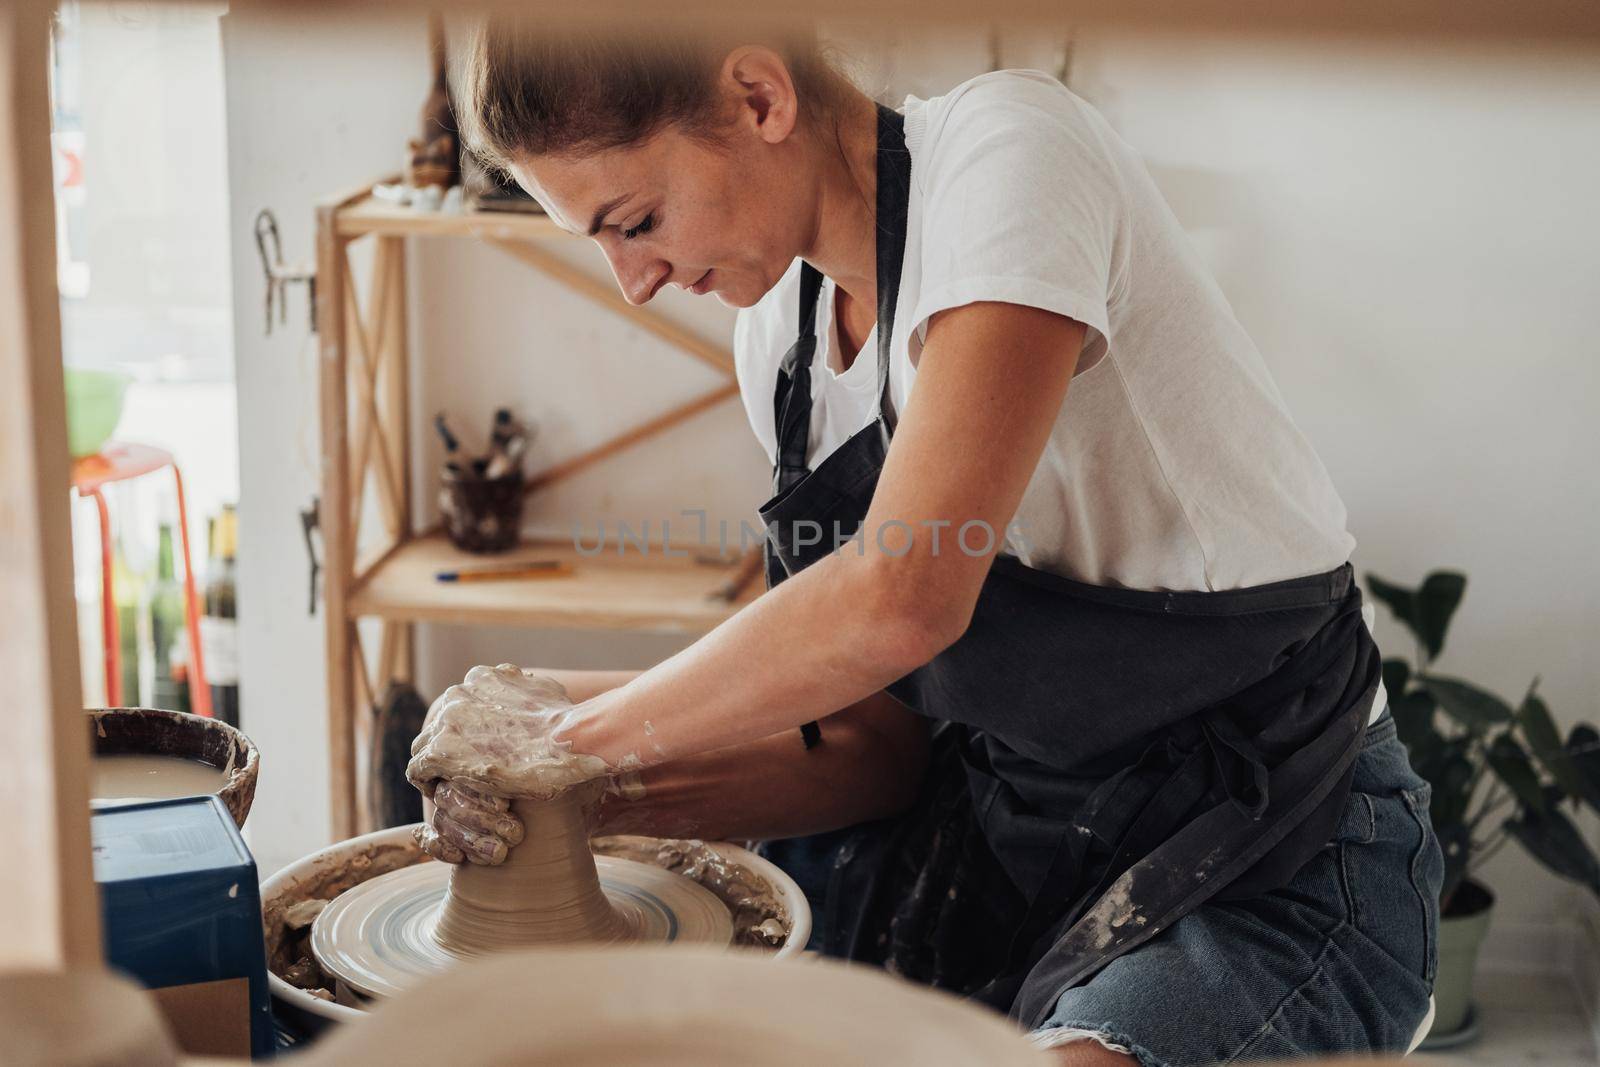 Potter Master at Work, Young Caucasian Woman Creating Clay Pot on Pottery Wheel in Her Studio